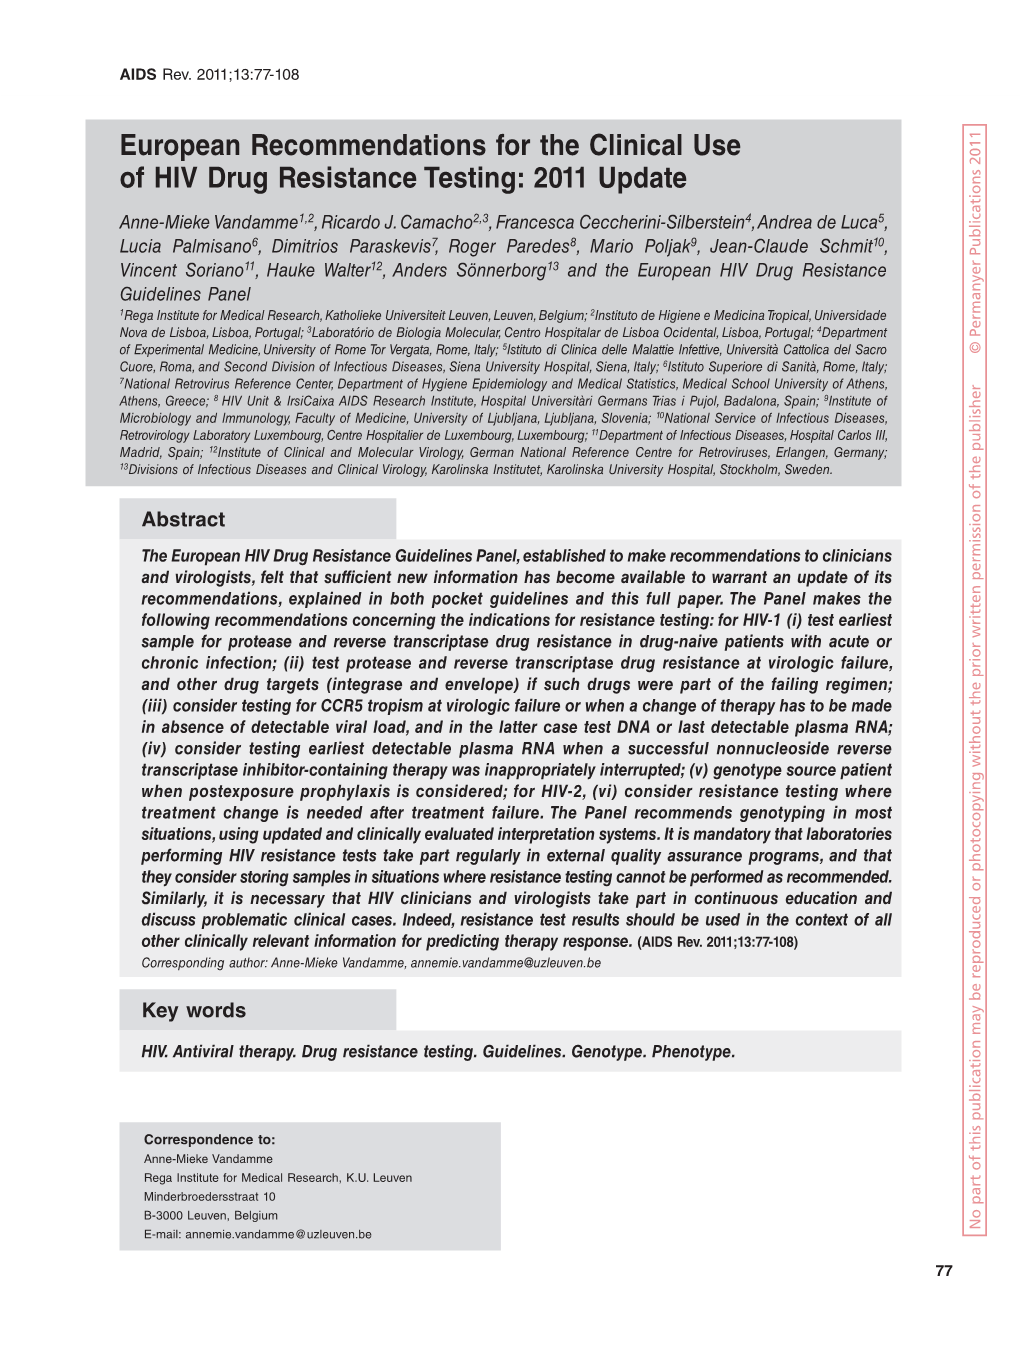 European Recommendations for the Clinical Use of HIV Drug Resistance Testing: 2011 Update